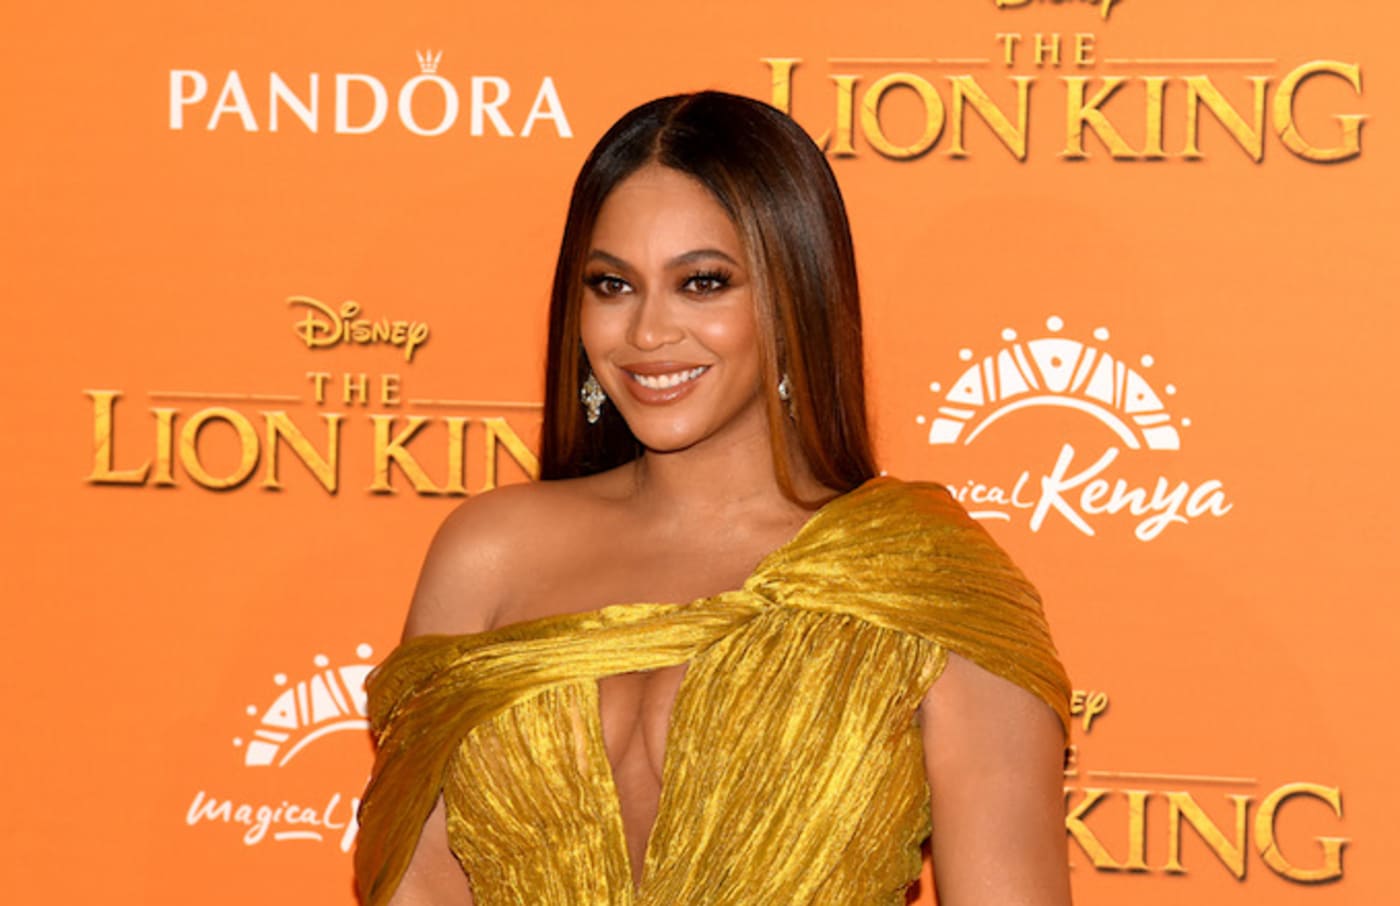 Beyonce Knowles Carter attends the European Premiere of Disney's "The Lion King".